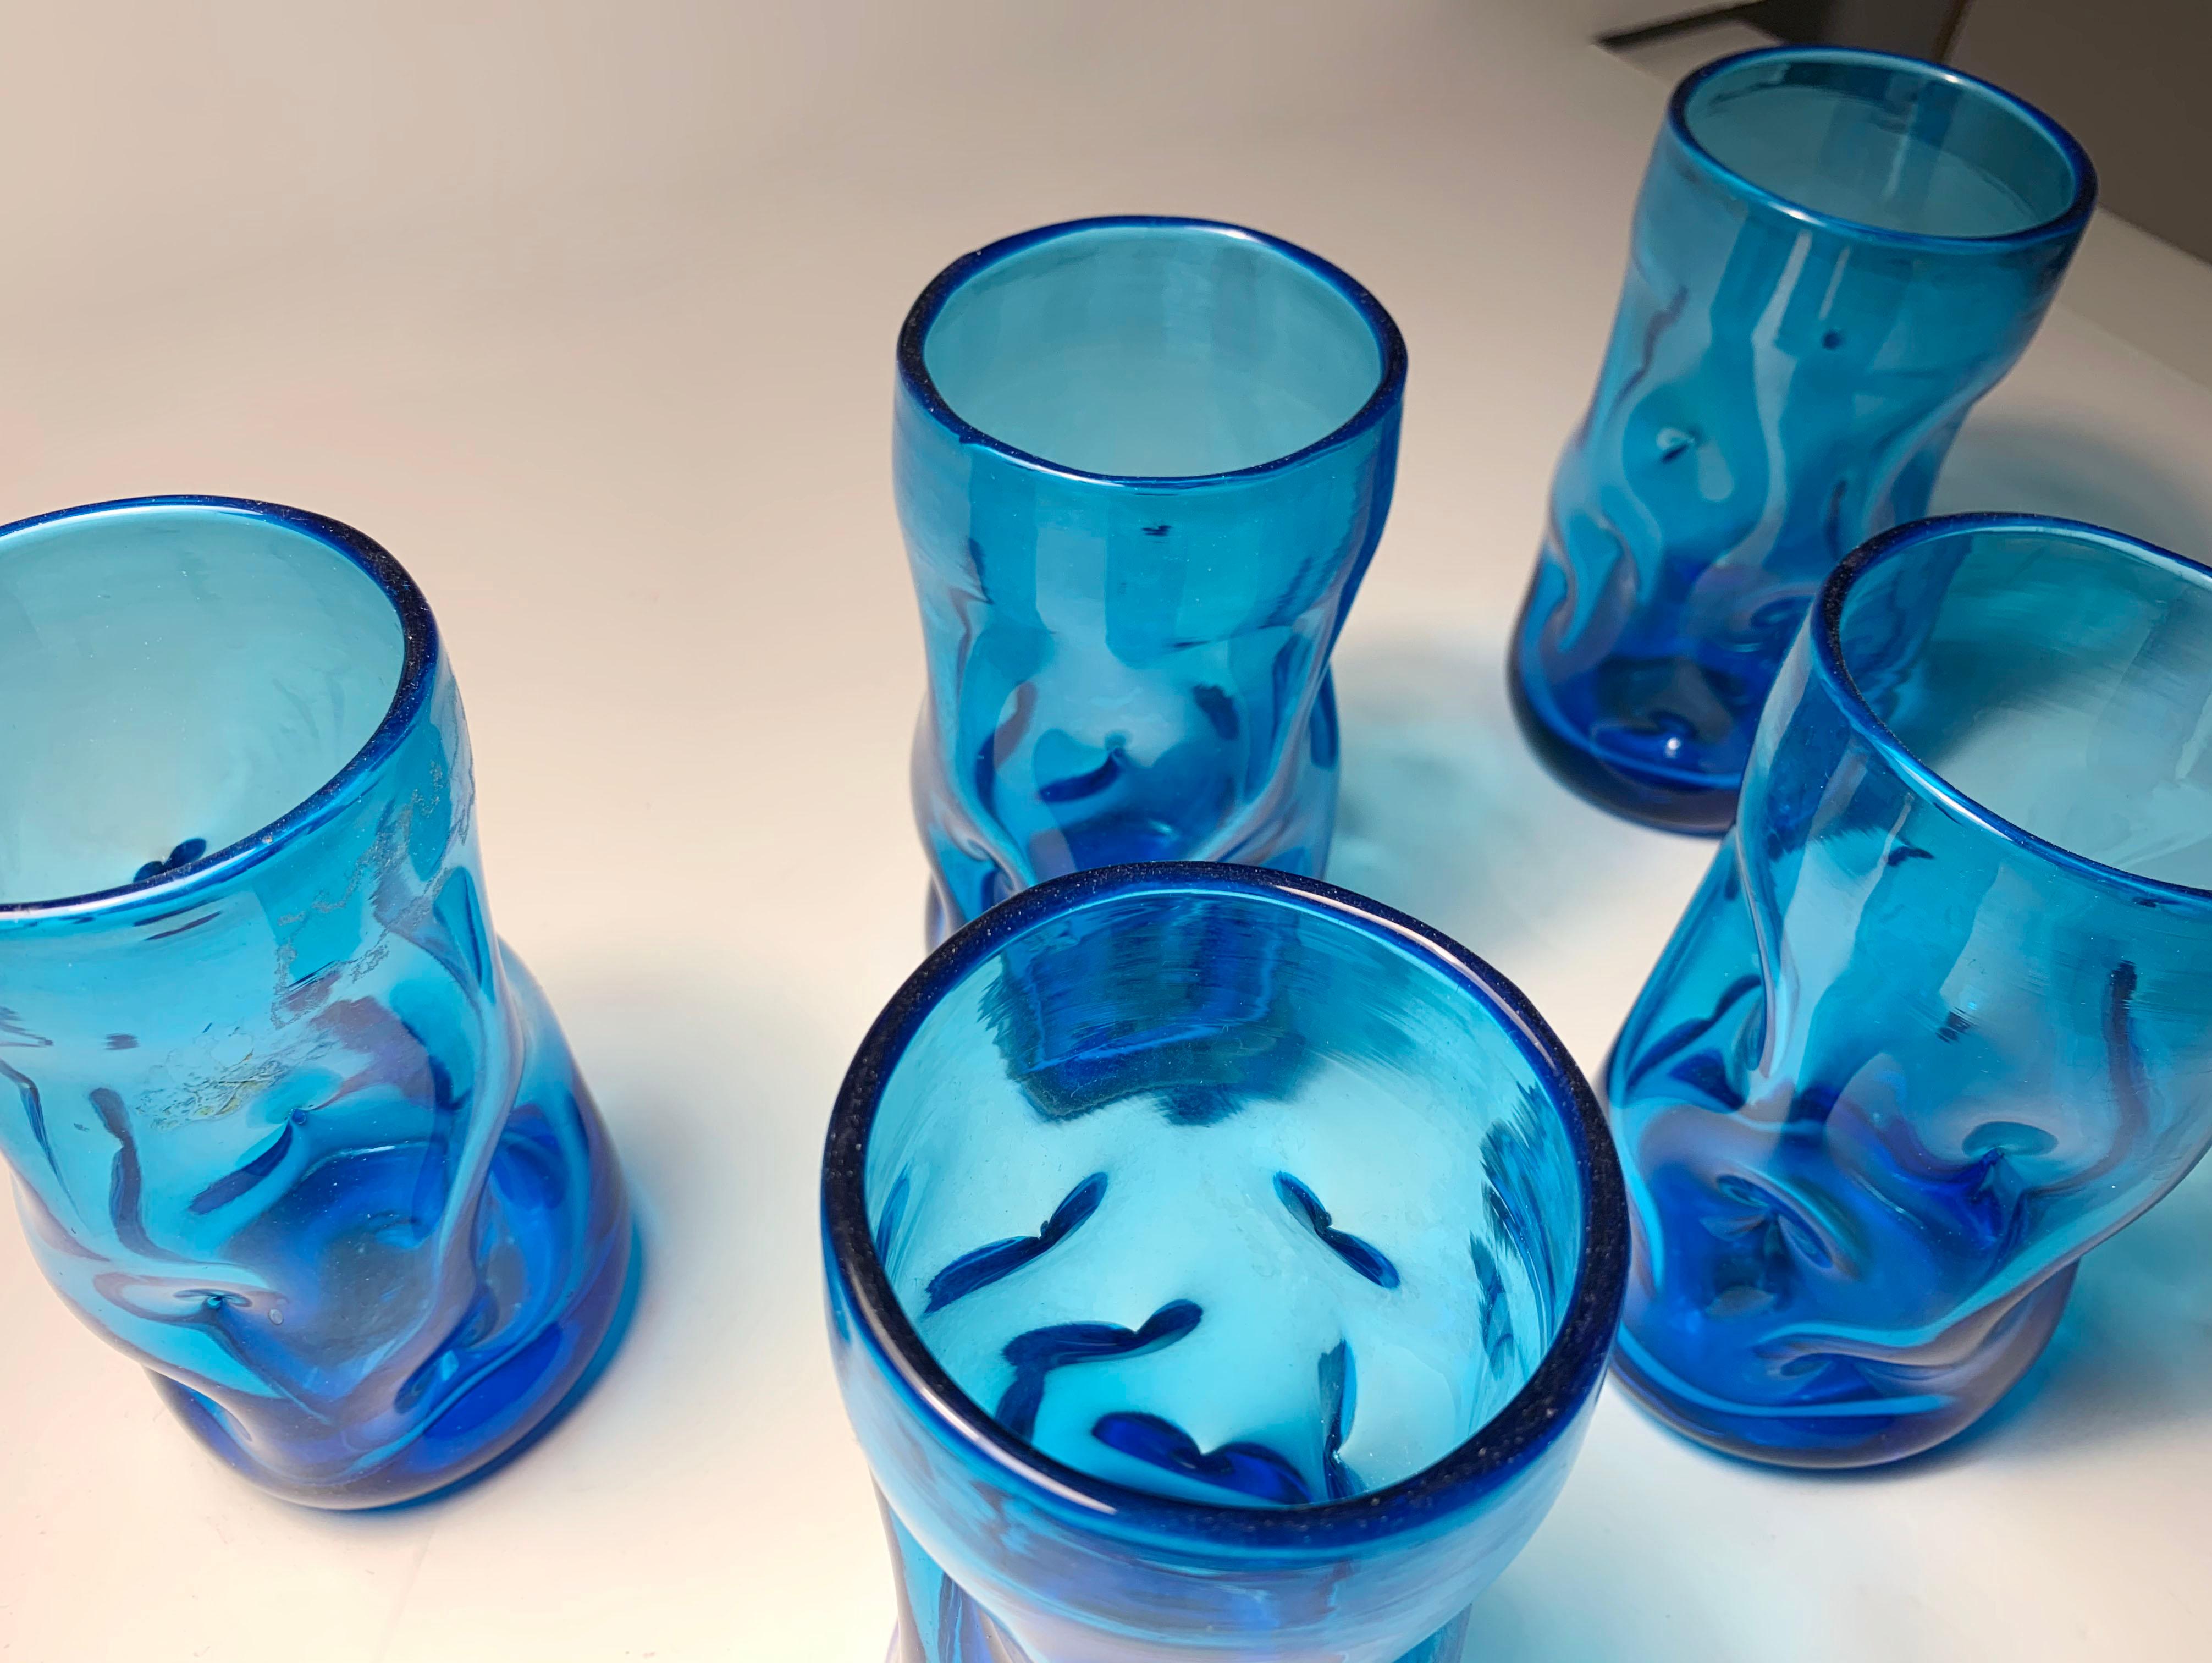 American Set of 5 Vintage Blenko Glass Pinch / Dimple Tumblers or Small Vases. For Sale